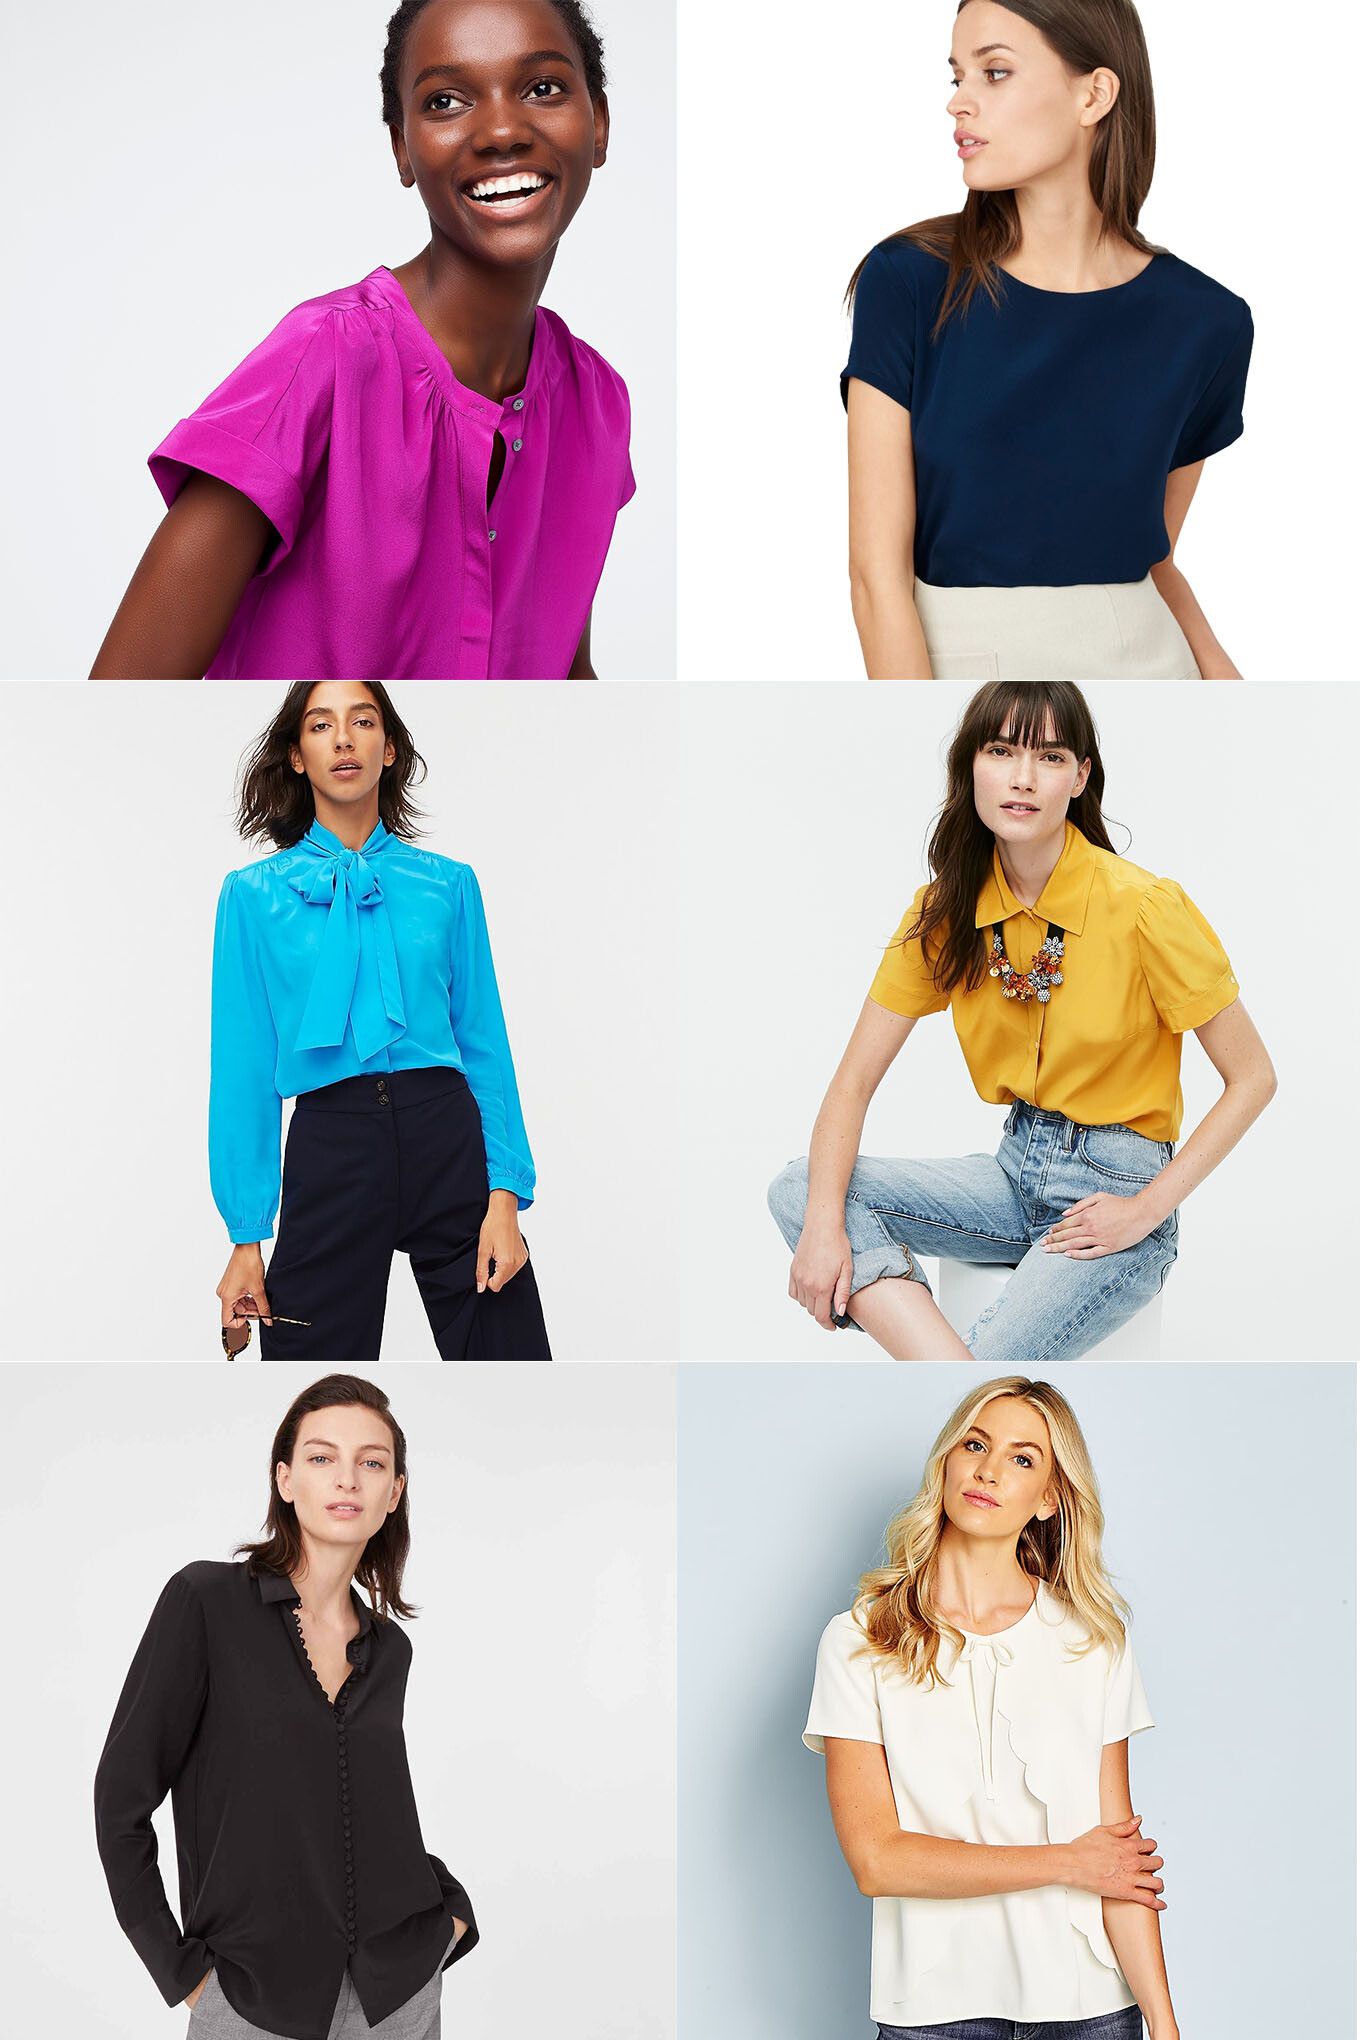 Are you tired of looking for the right top to wear? Here are a handful of classic shirts that work with all styles of skirts and pants!